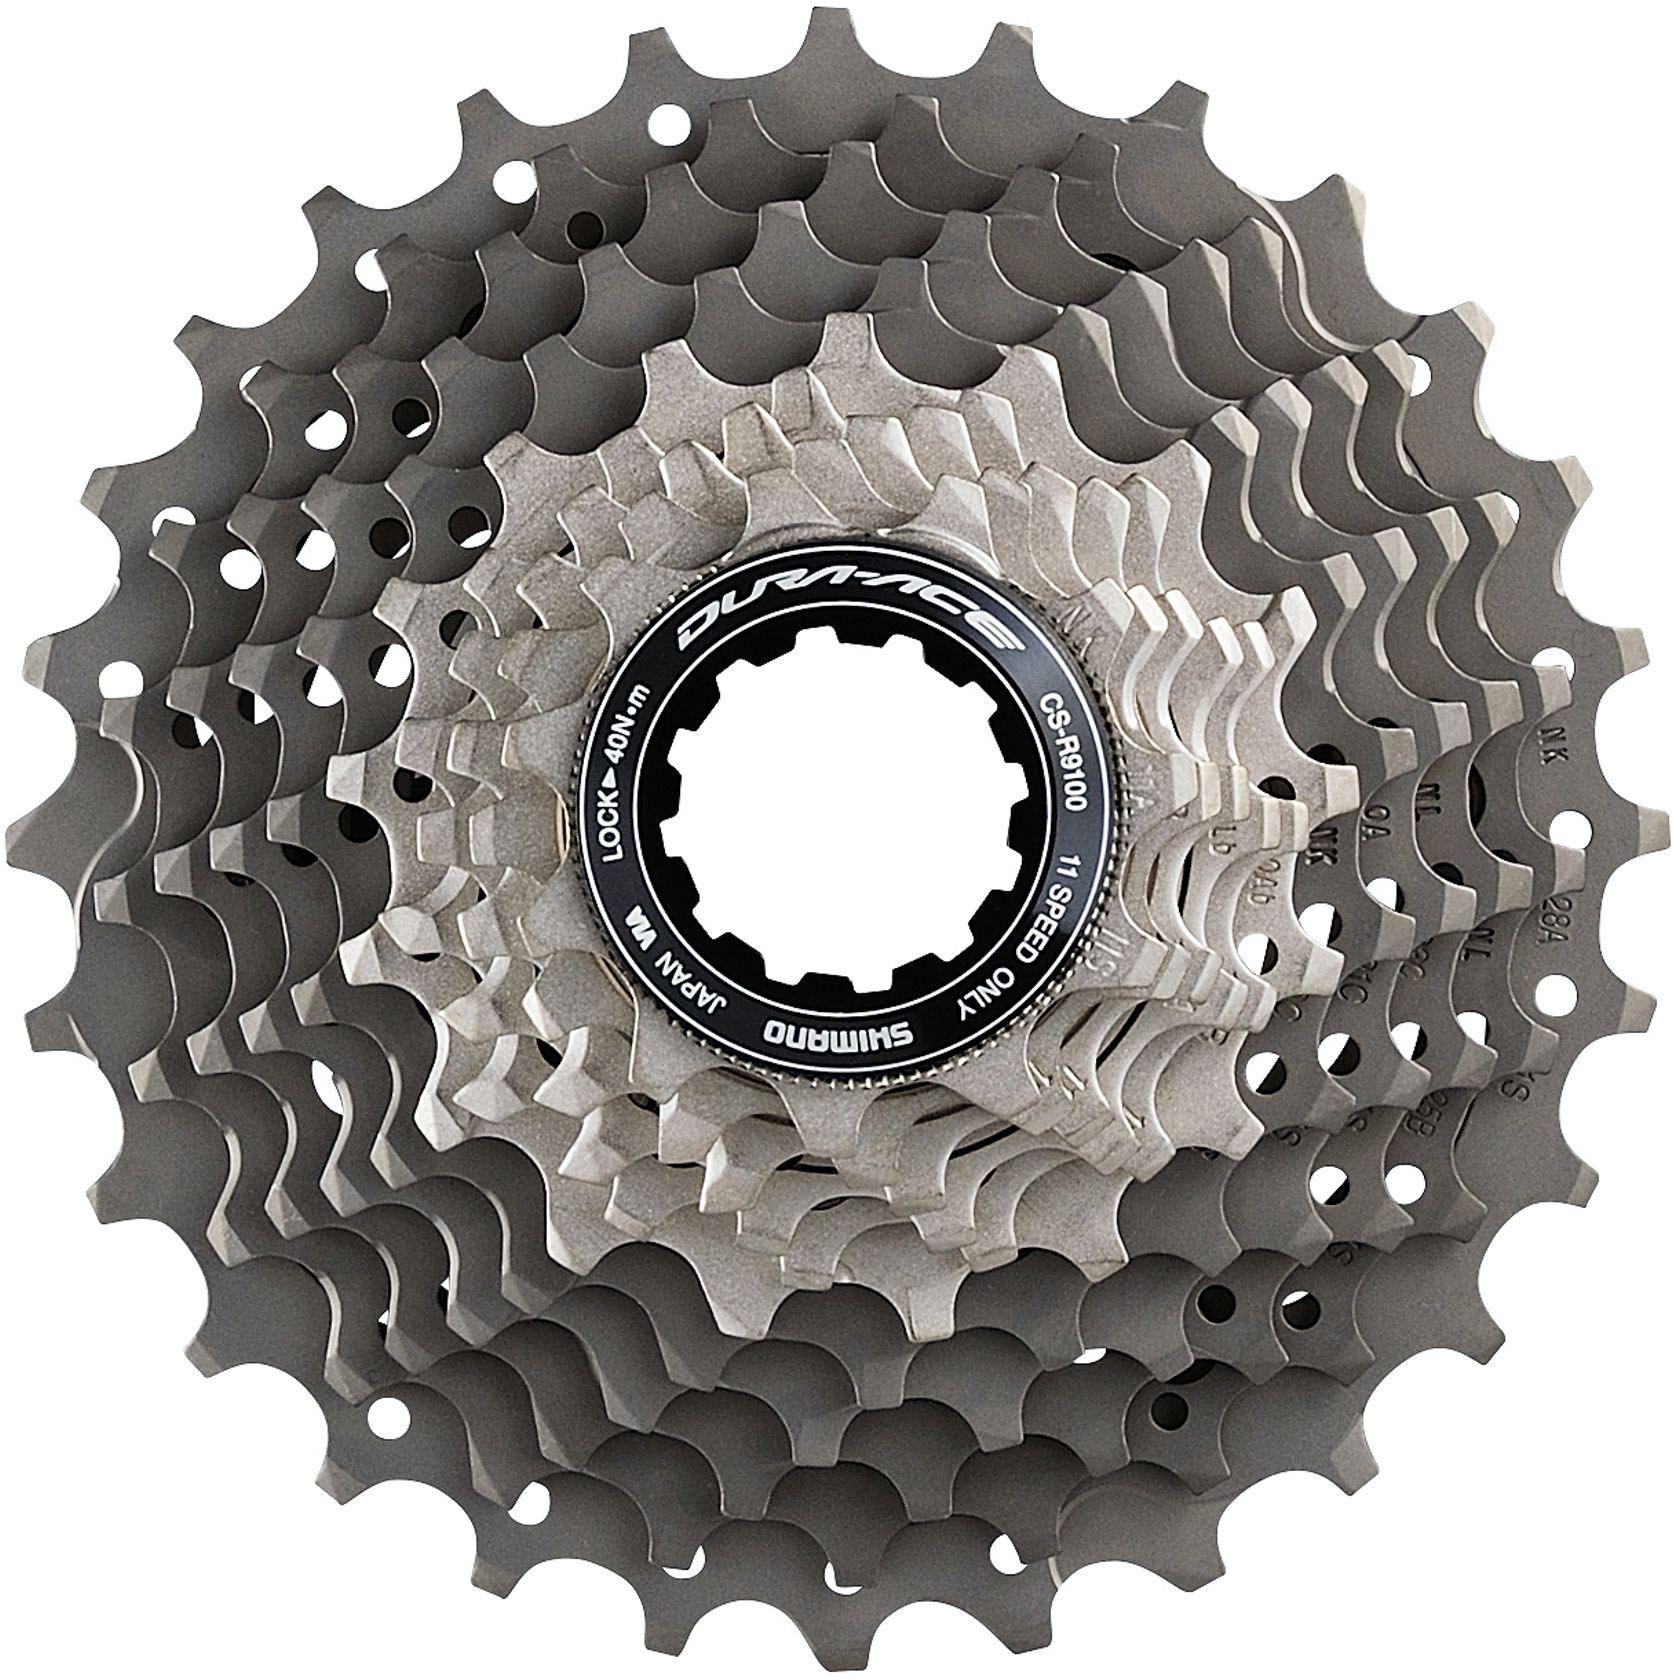 Shimano Dura-ace R9100 11 Speed Cassette (11-25t) - Silver